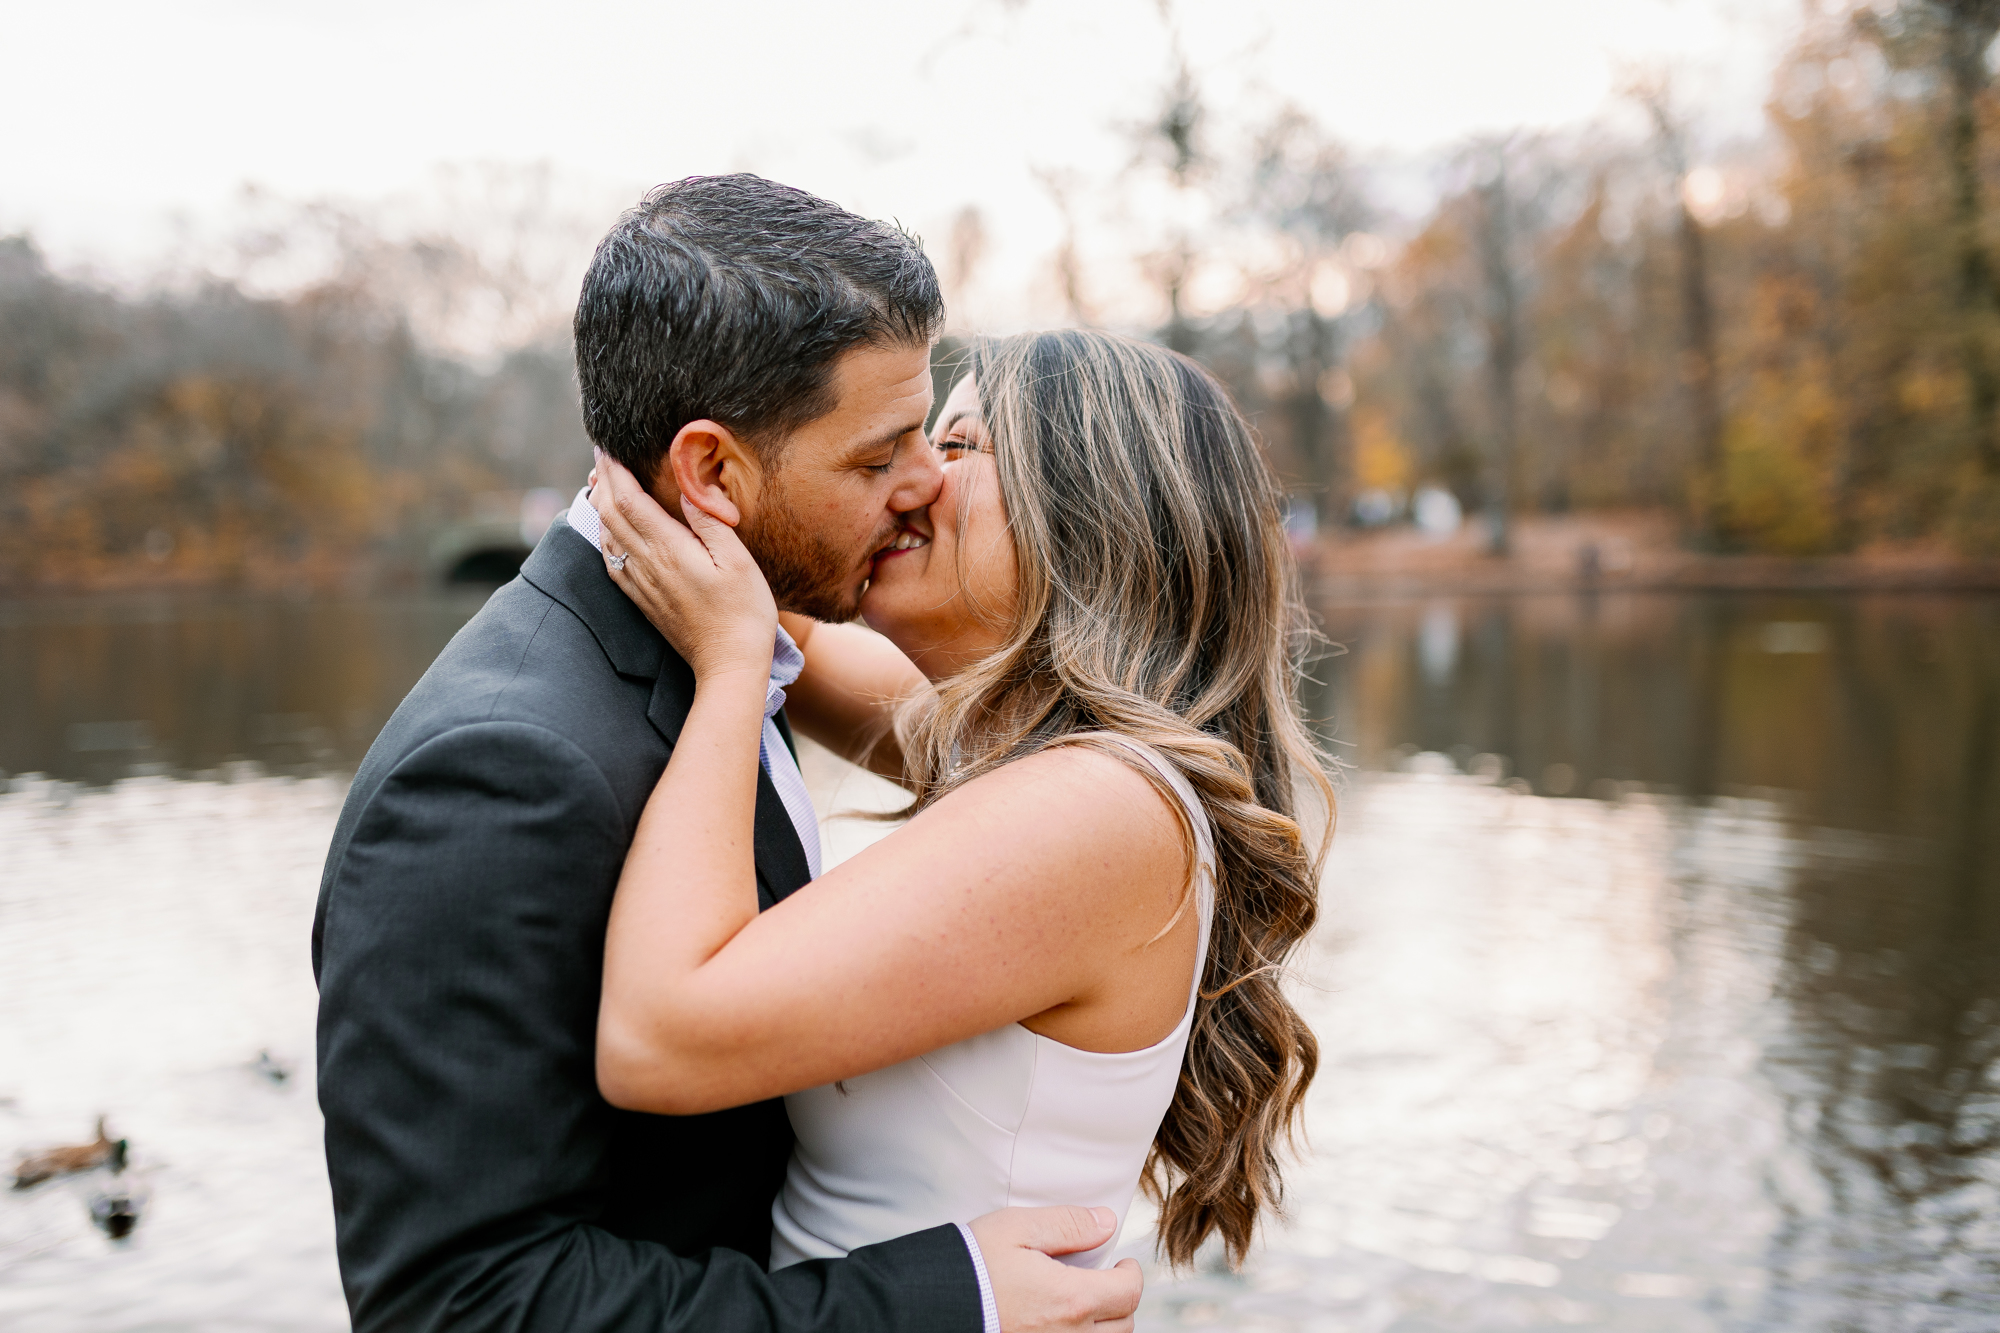 Romantic NYC Engagement photo locations and ideas